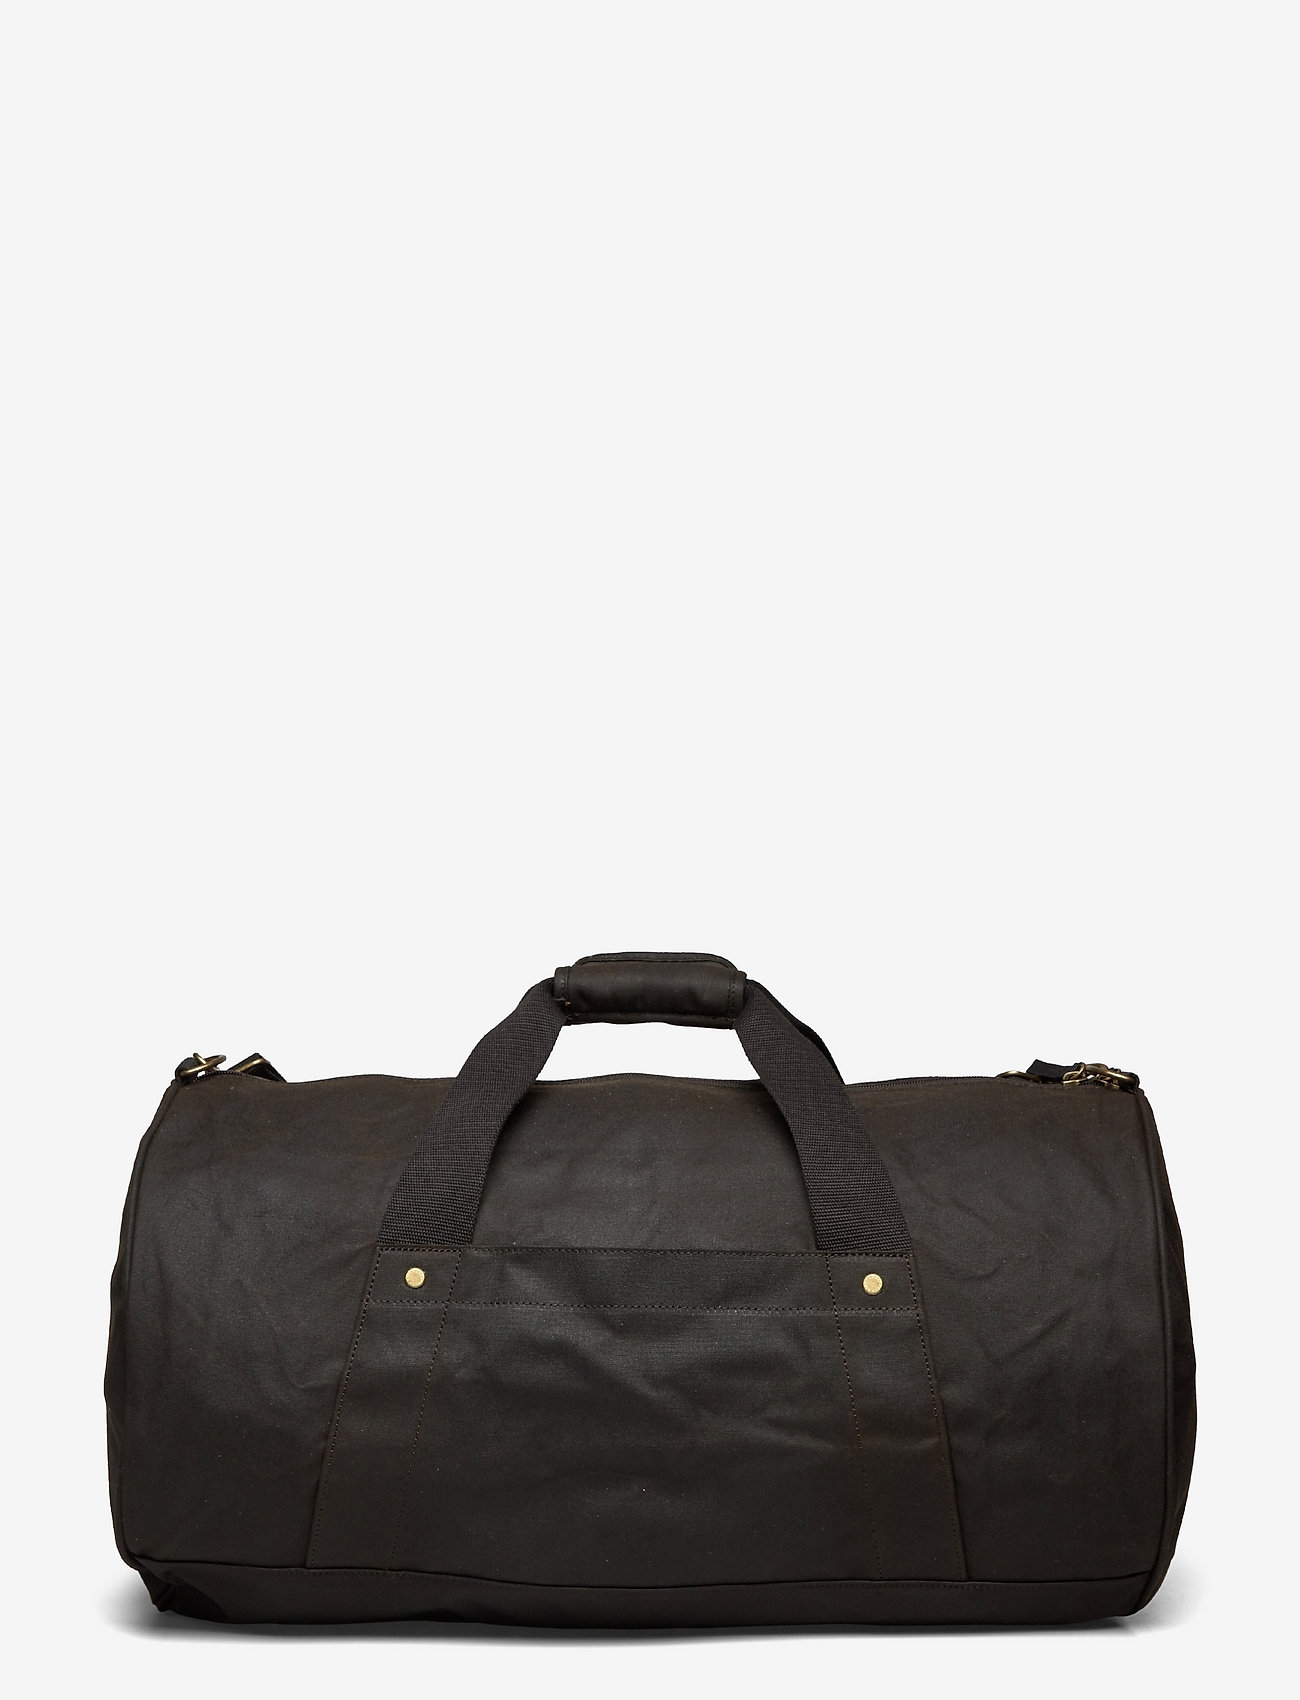 Barbour - Barbour Ess Duffle - olive - 1